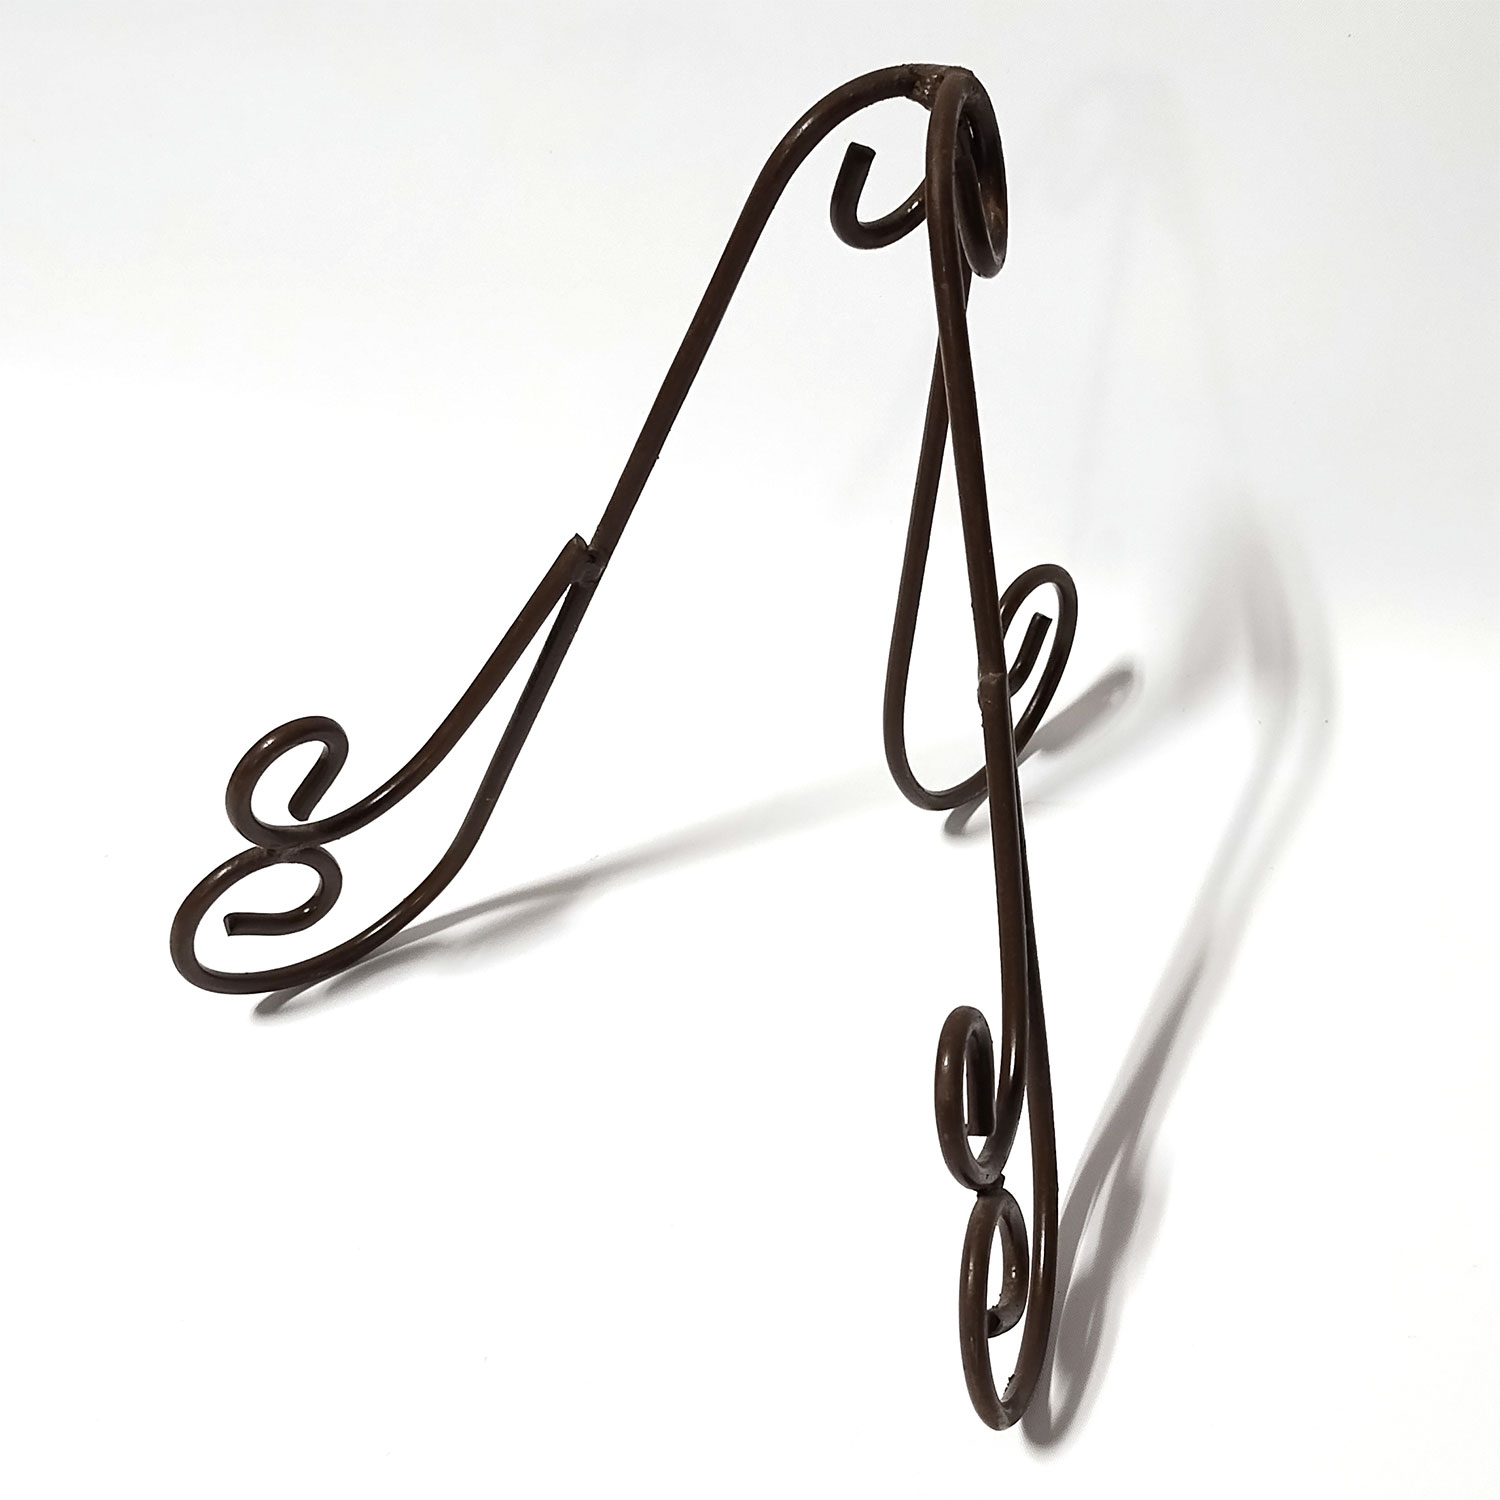 126733 - Rustic Metal Large Plate Stand - 8in H x 9in W x 9in D